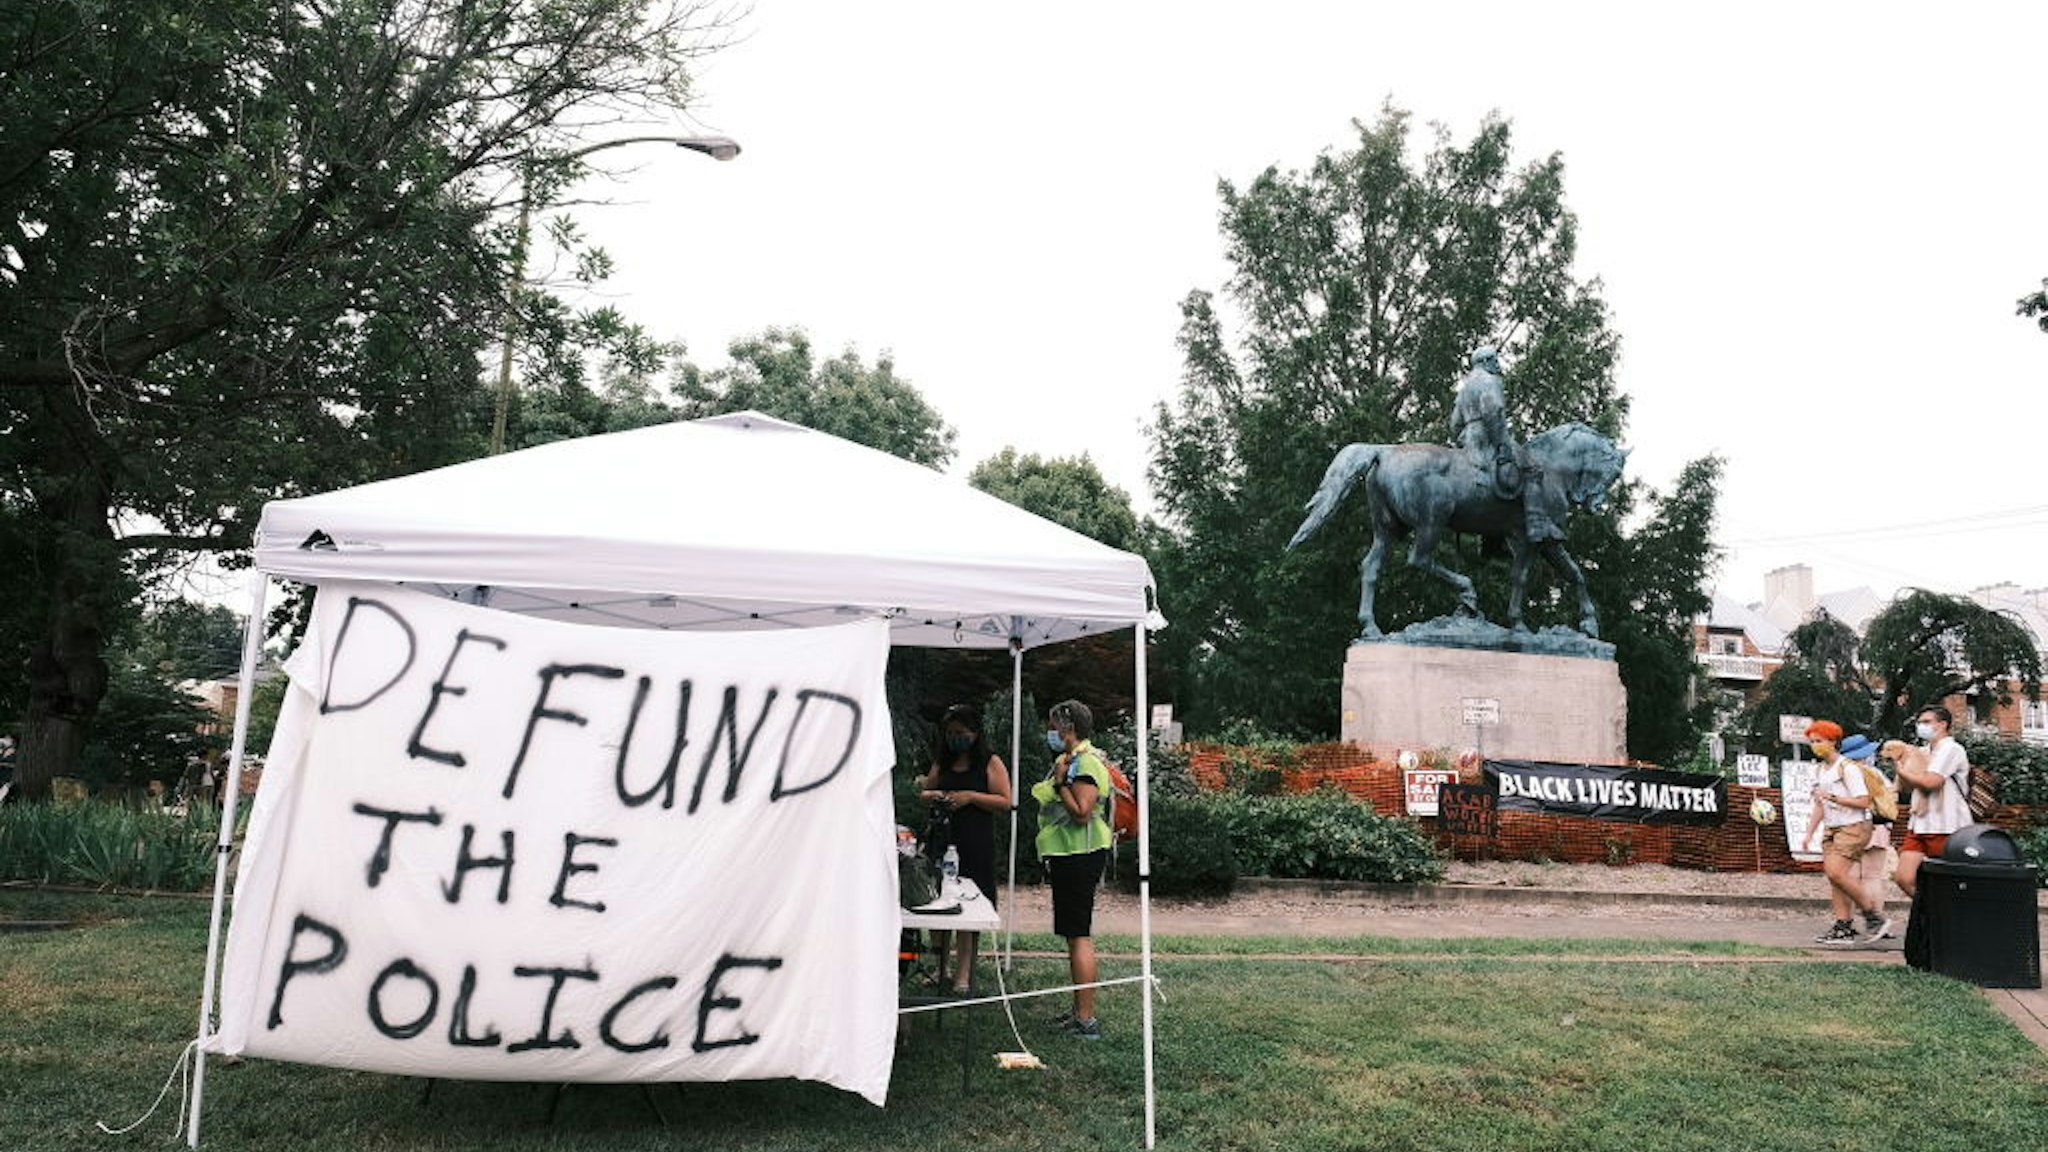 CHARLOTTESVILLE, VA - AUGUST 12: A banner that reads "Defund The Police" is seen during the "Reclaim the Park" gathering at Emancipation Park on August 12, 2020 in Charlottesville, Virginia. Community members in Charlottesville collaborated with Congregate Cville and other Charlottesville organizations to put together the "Reclaim the Park" gathering to mark the third anniversary of a far-right rally on August 12, 2017.